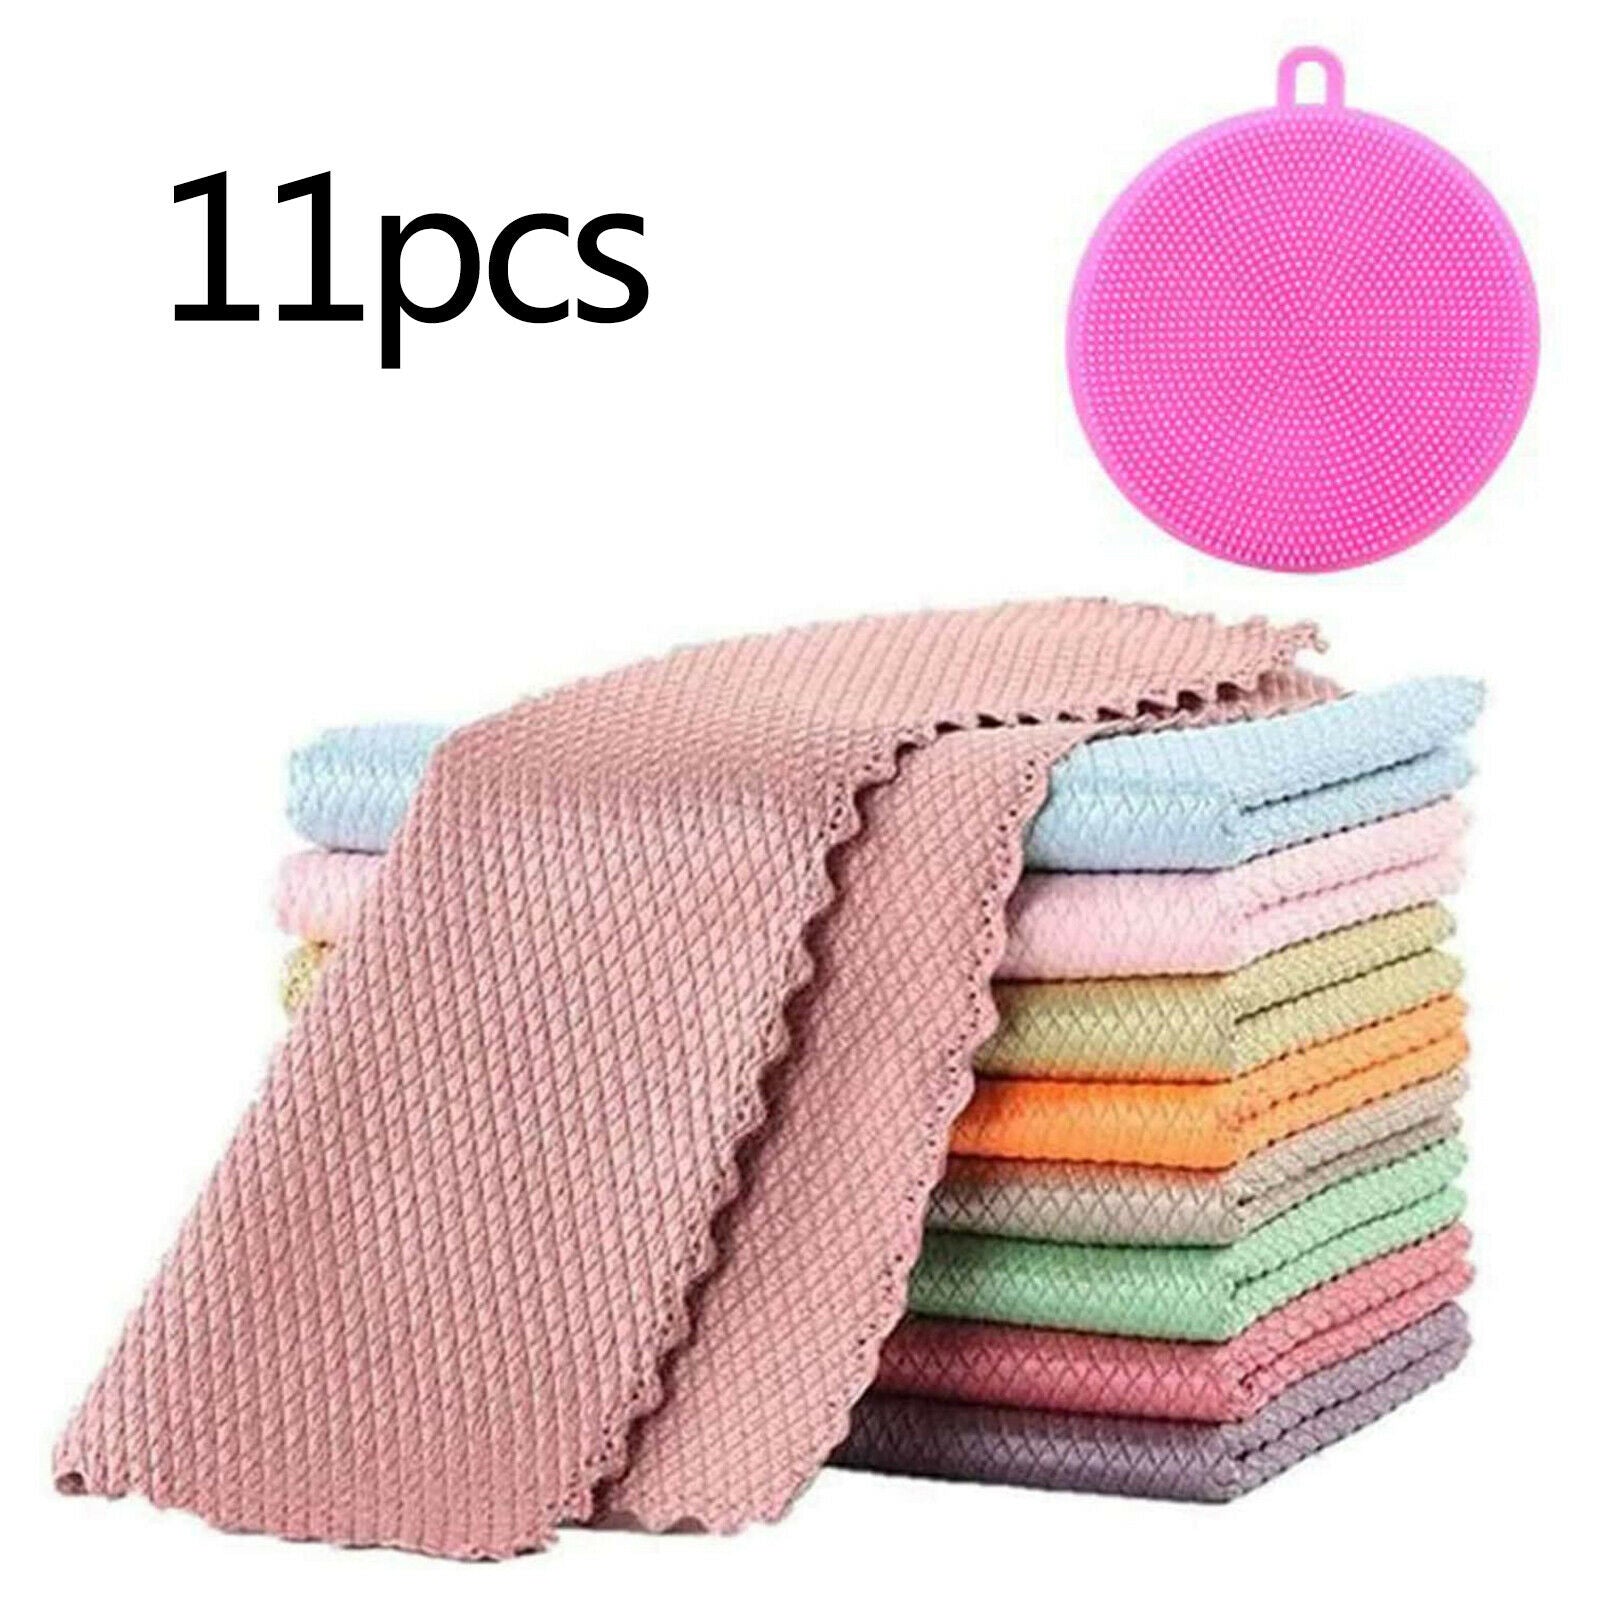 11 Pieces Fish Scale Cloths, Super Absorbent Kitchen Cleaning Rags with Brush